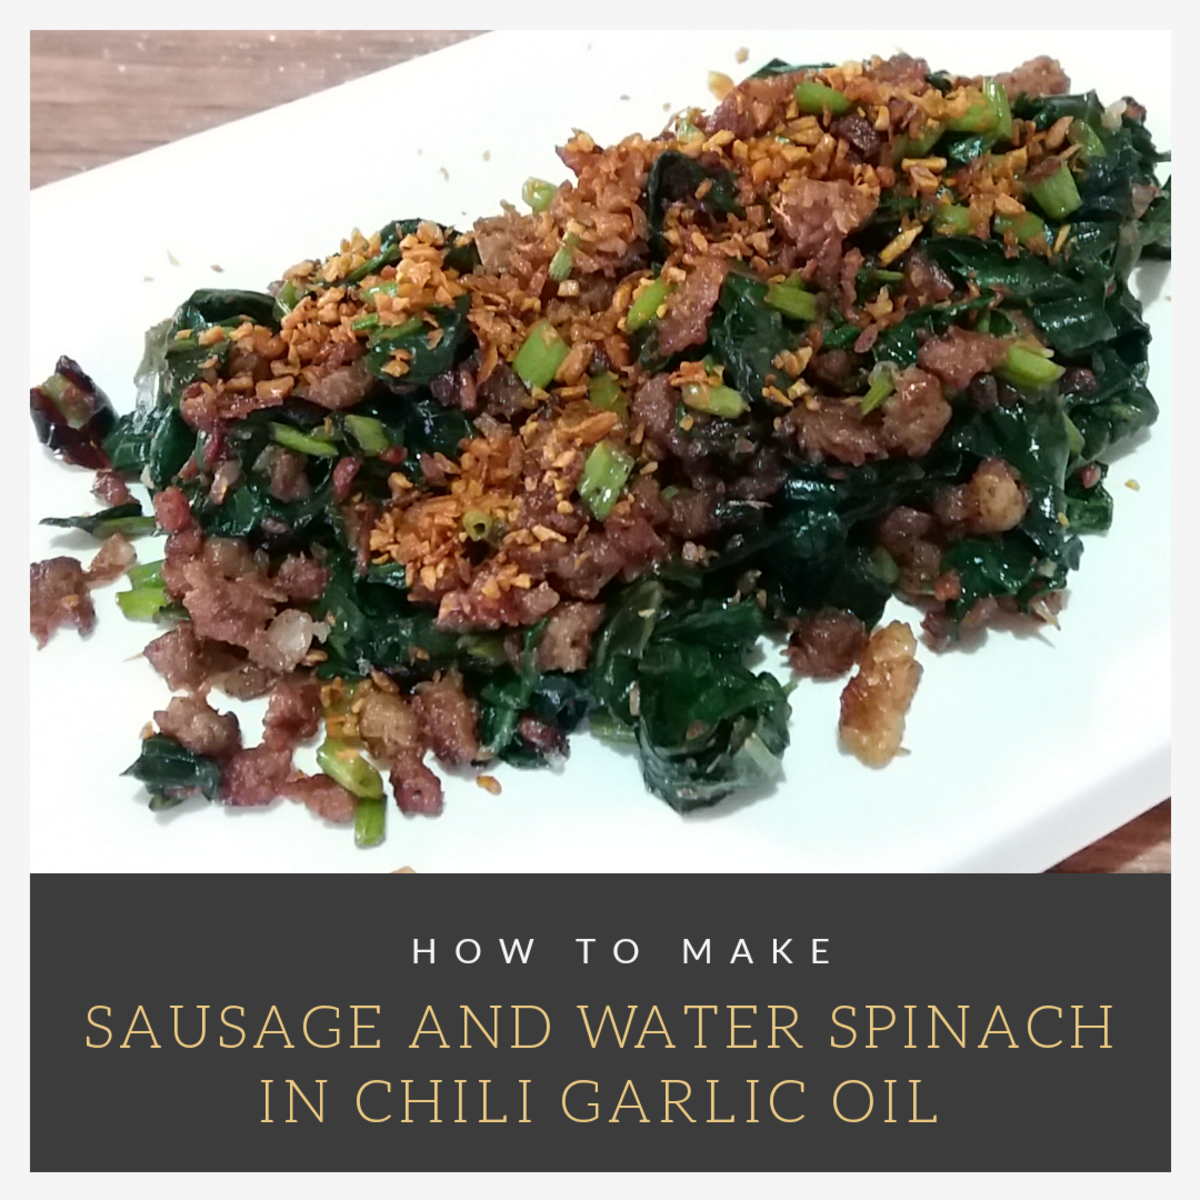 How to Make Sausage and Water Spinach in Chili Garlic Oil